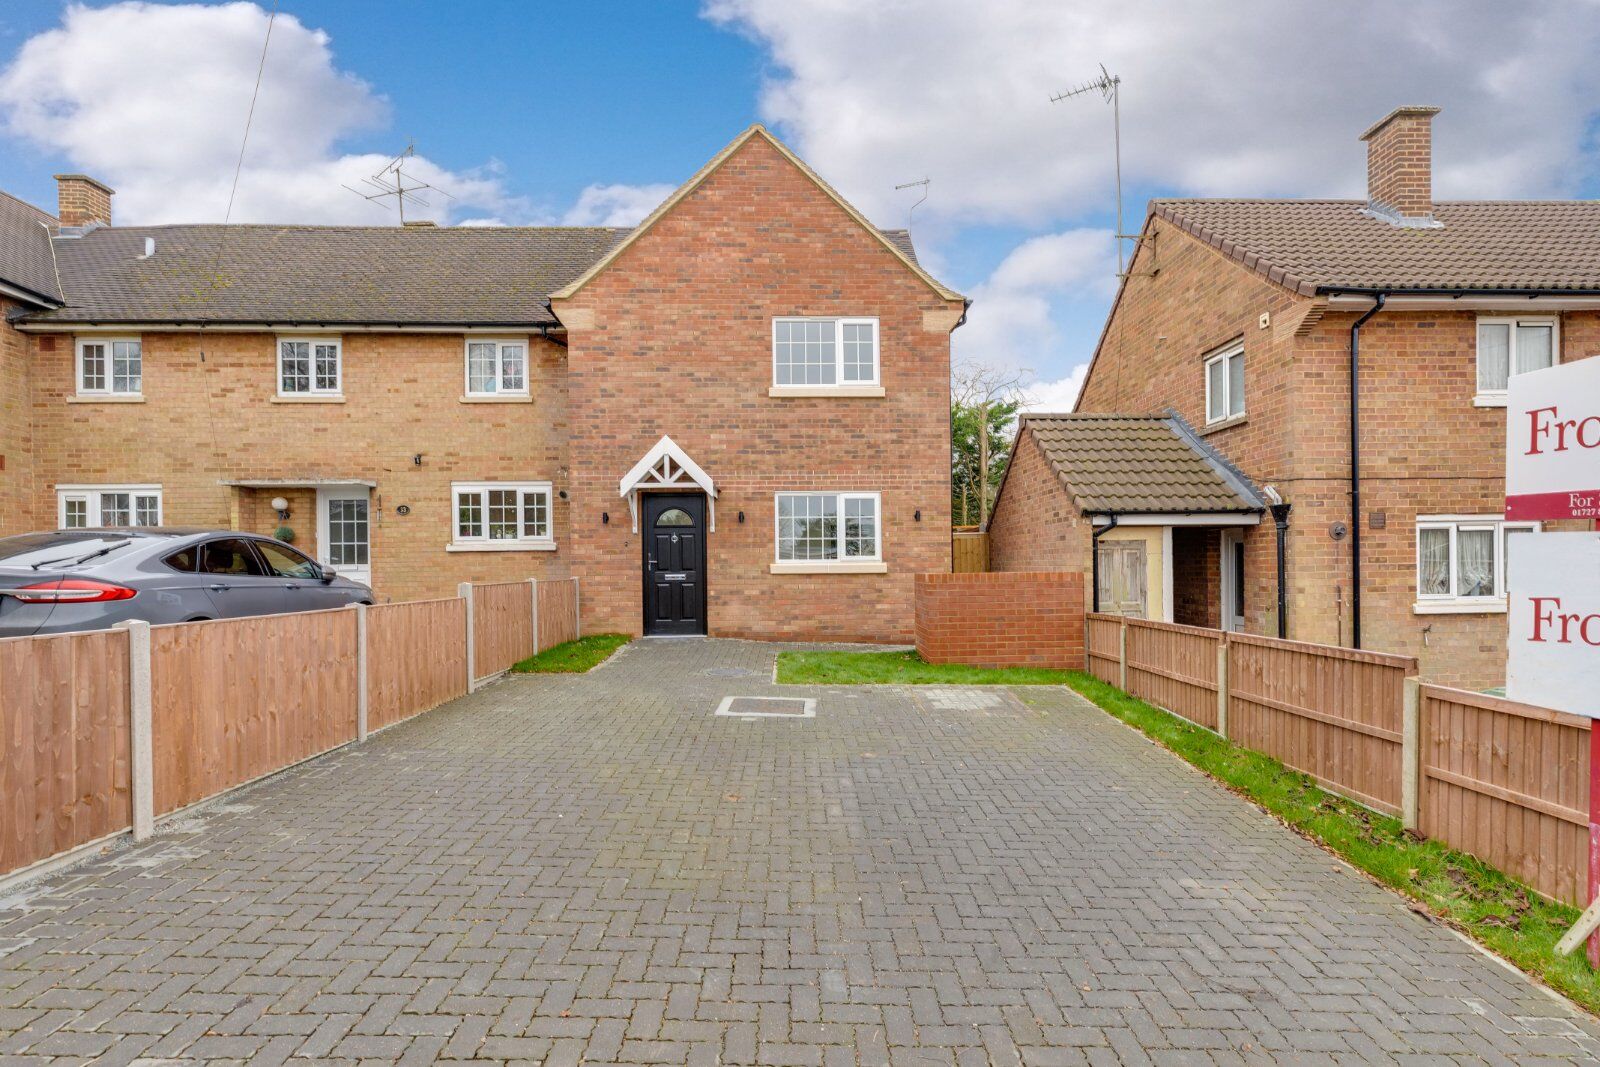 3 bedroom end terraced house for sale Chalkdell Fields, St. Albans, AL4, main image